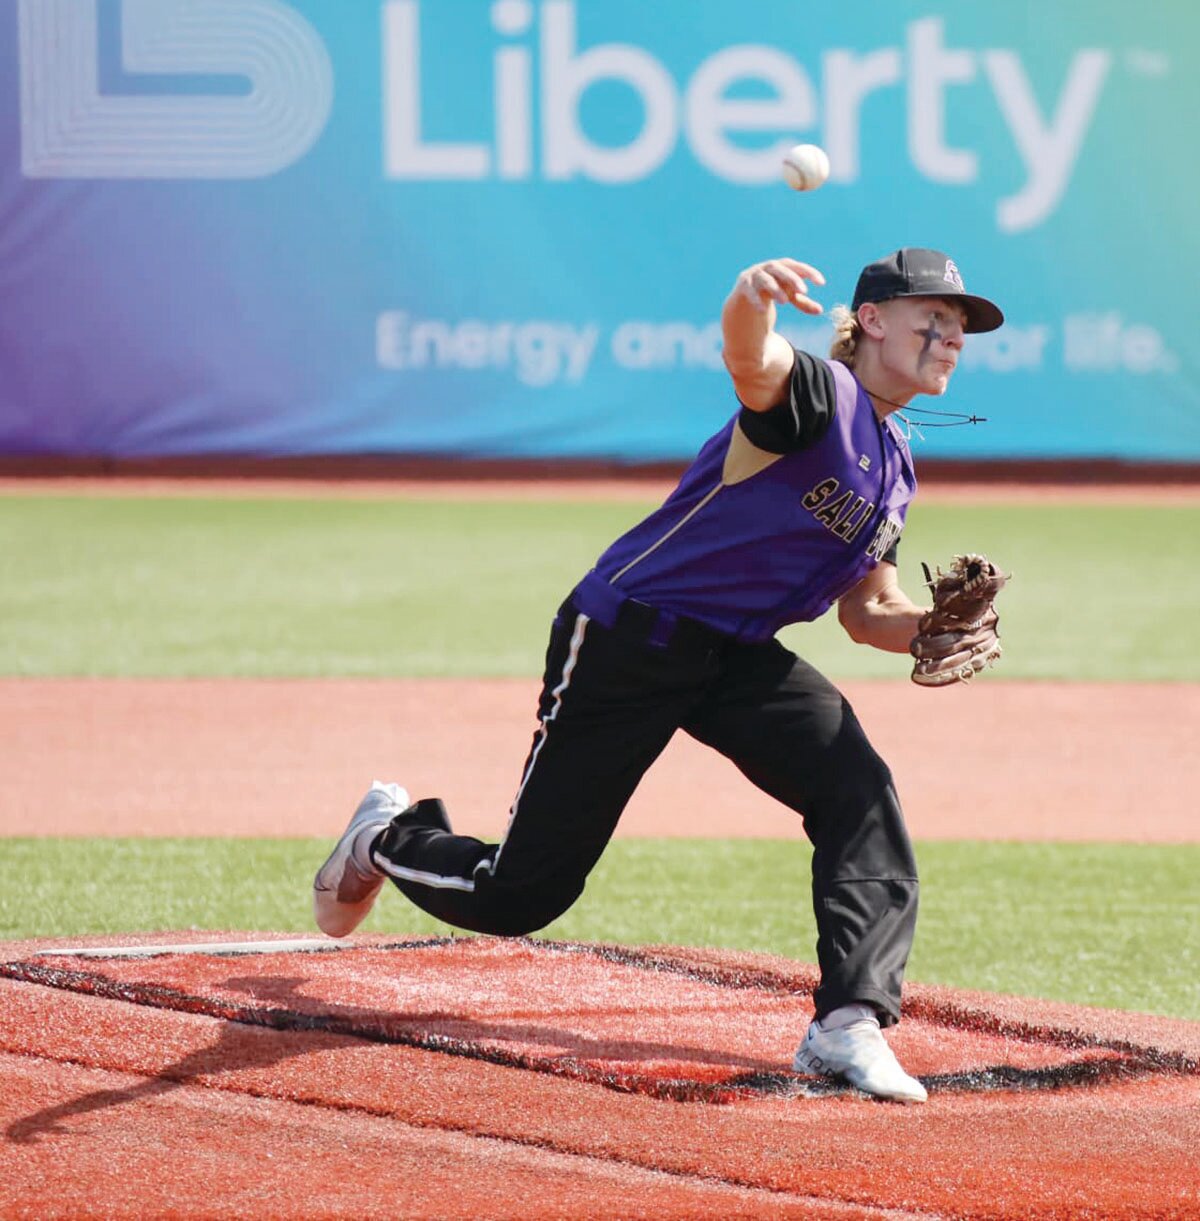 Salisbury pitcher Eli Wekenborg deals toward home plate during the Class 2 state semifinals versus Chaffee on Monday, May 29, at Sky Bacon Stadium in Ozark. The Panthers defeated the Red Devils, 11-5.